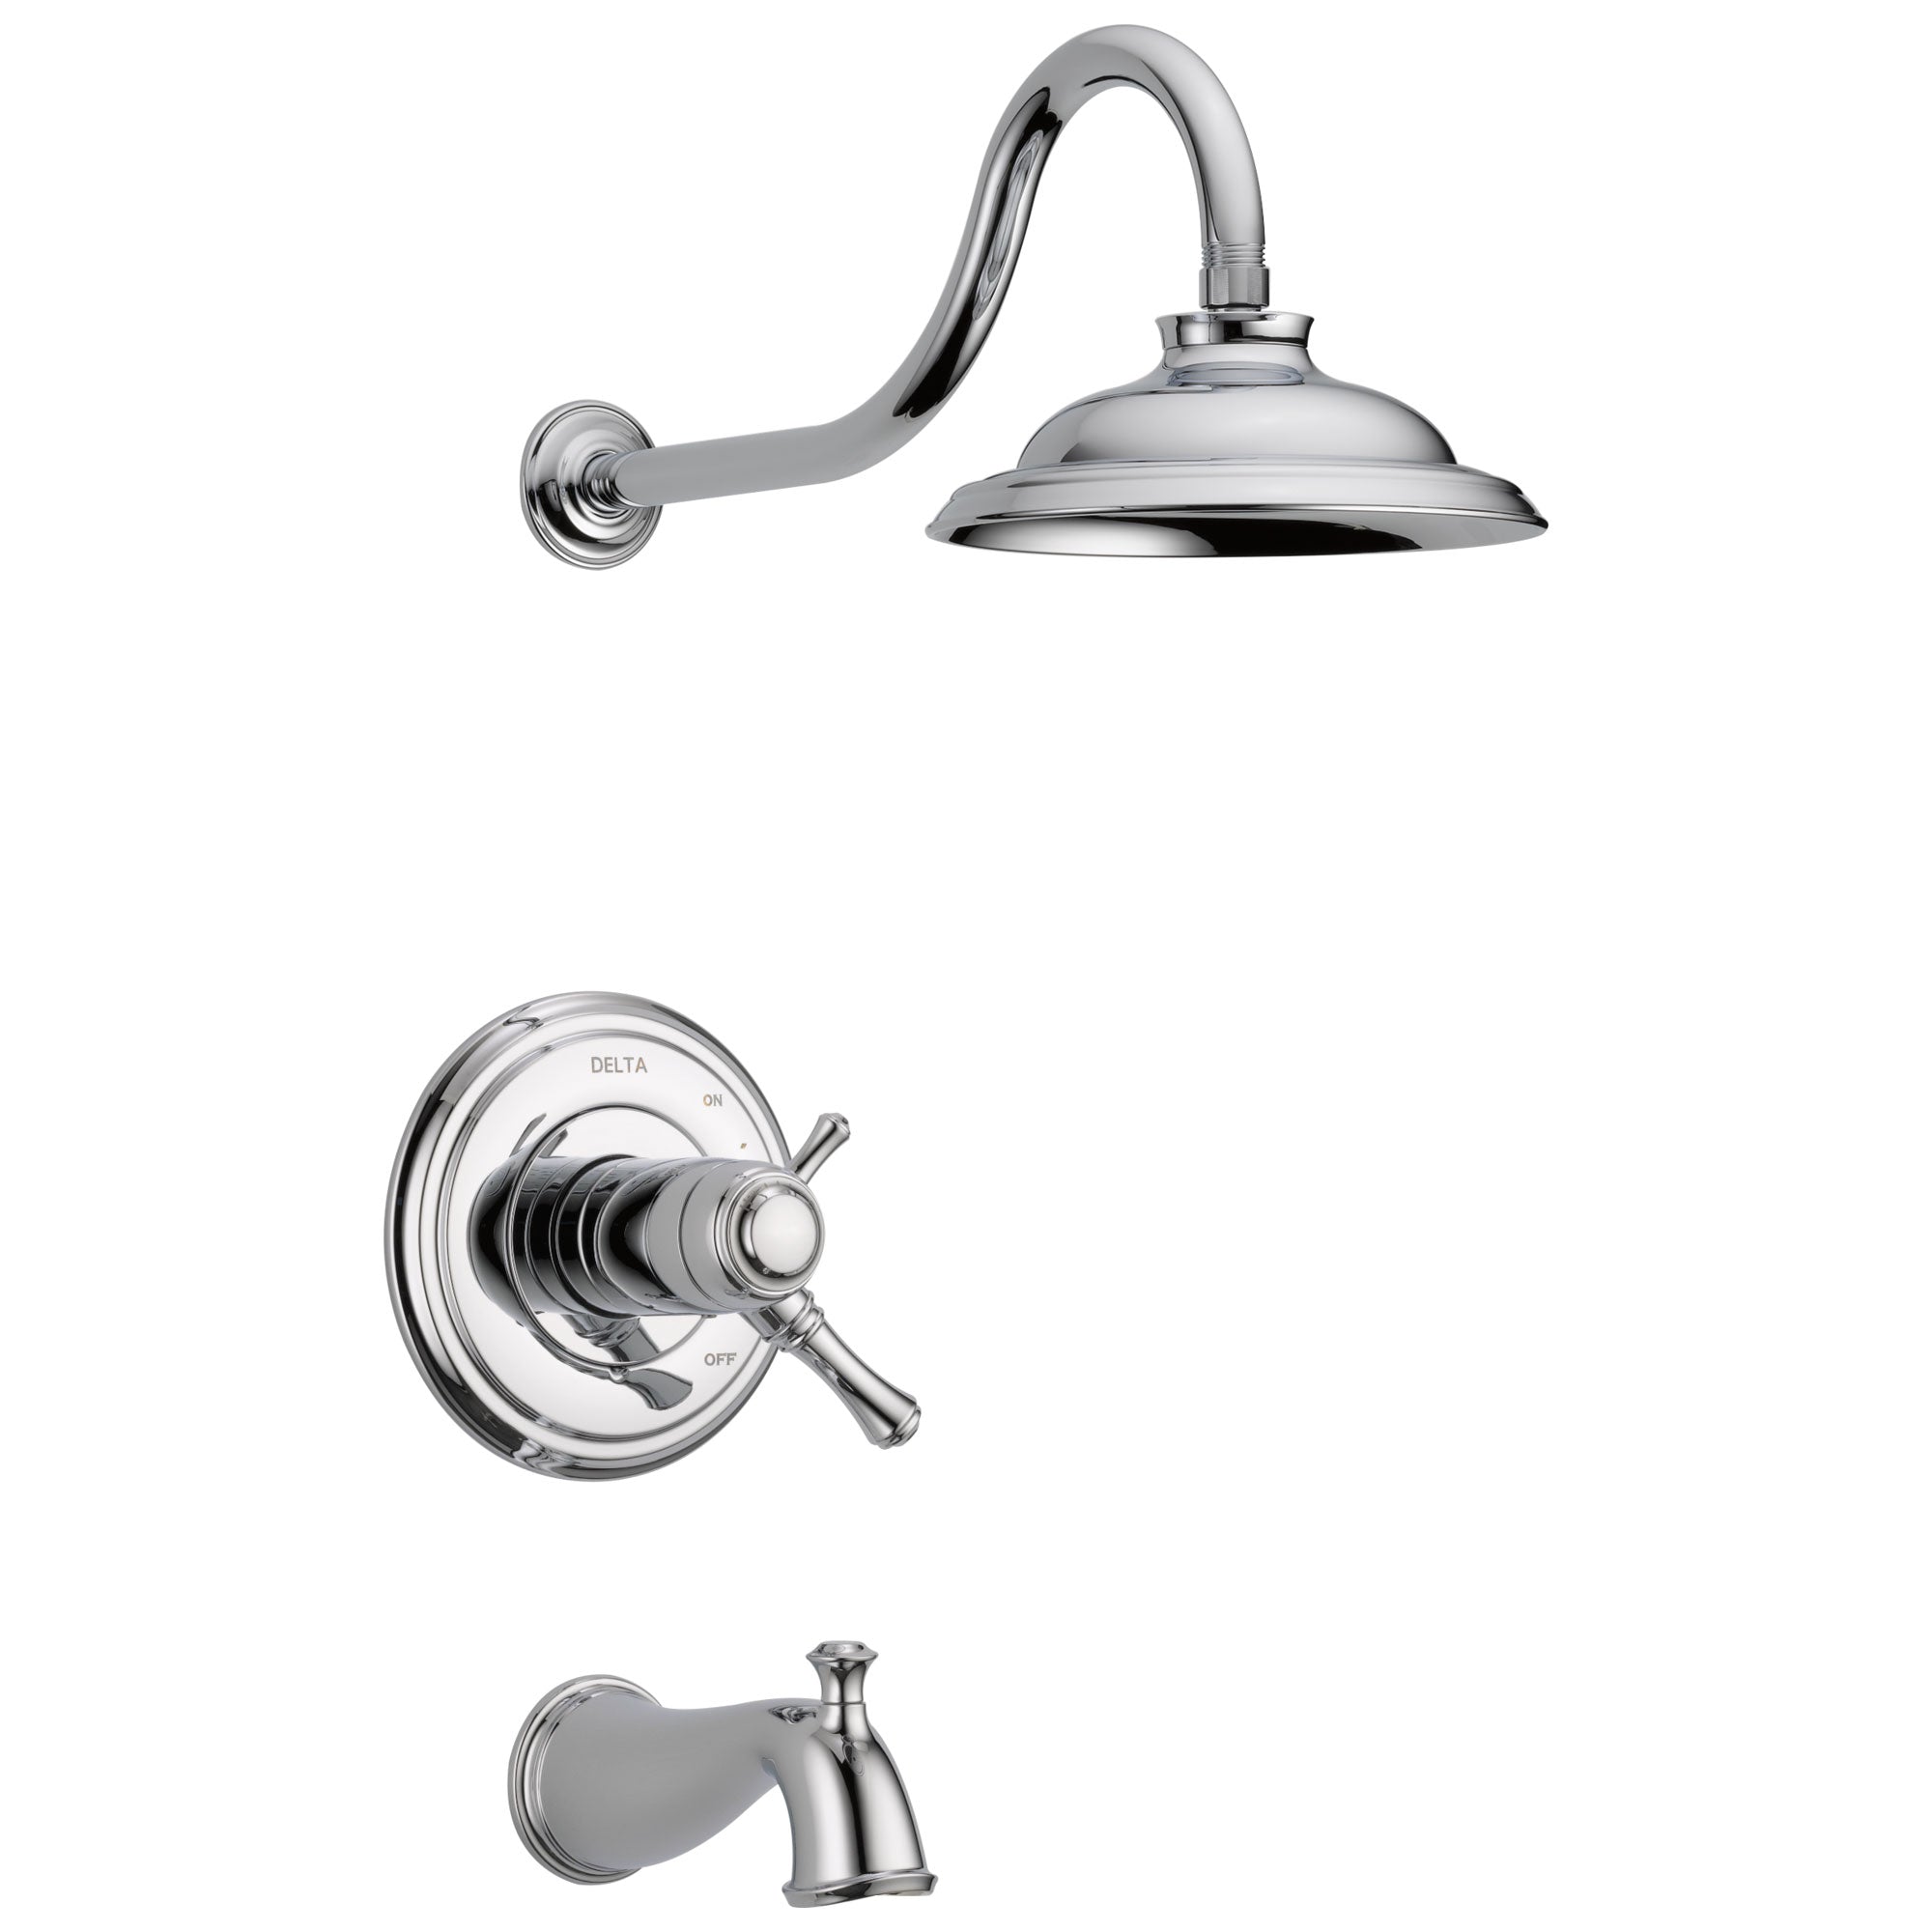 Delta Cassidy Chrome Finish TempAssure Water Efficient H2OKinetic Tub & Shower Combo Includes Handles, 17T Cartridge, and Valve without Stops D3217V